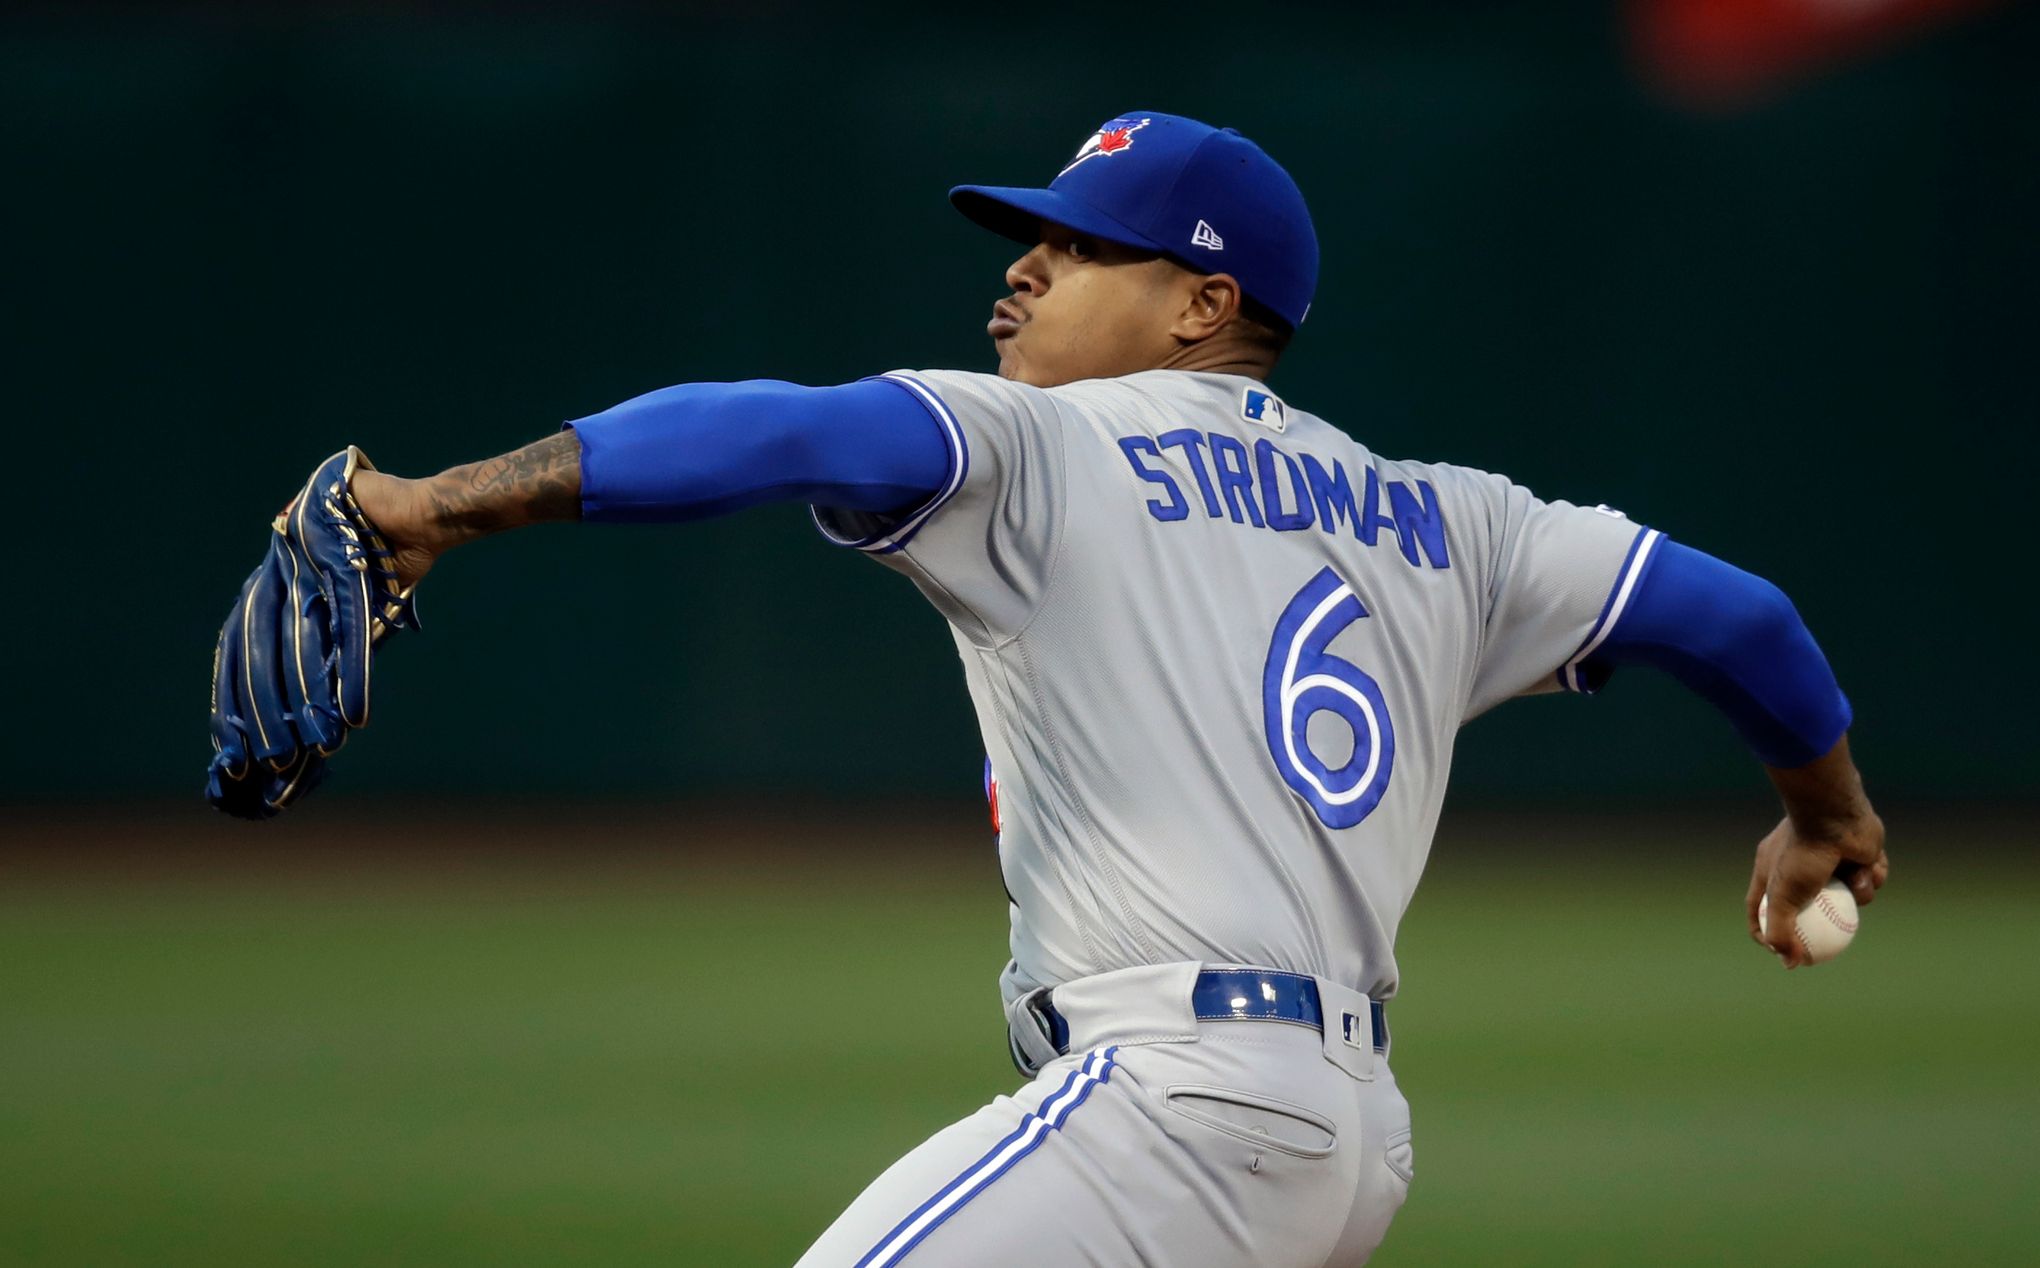 The Marcus Stroman trade is already paying off for the Blue Jays